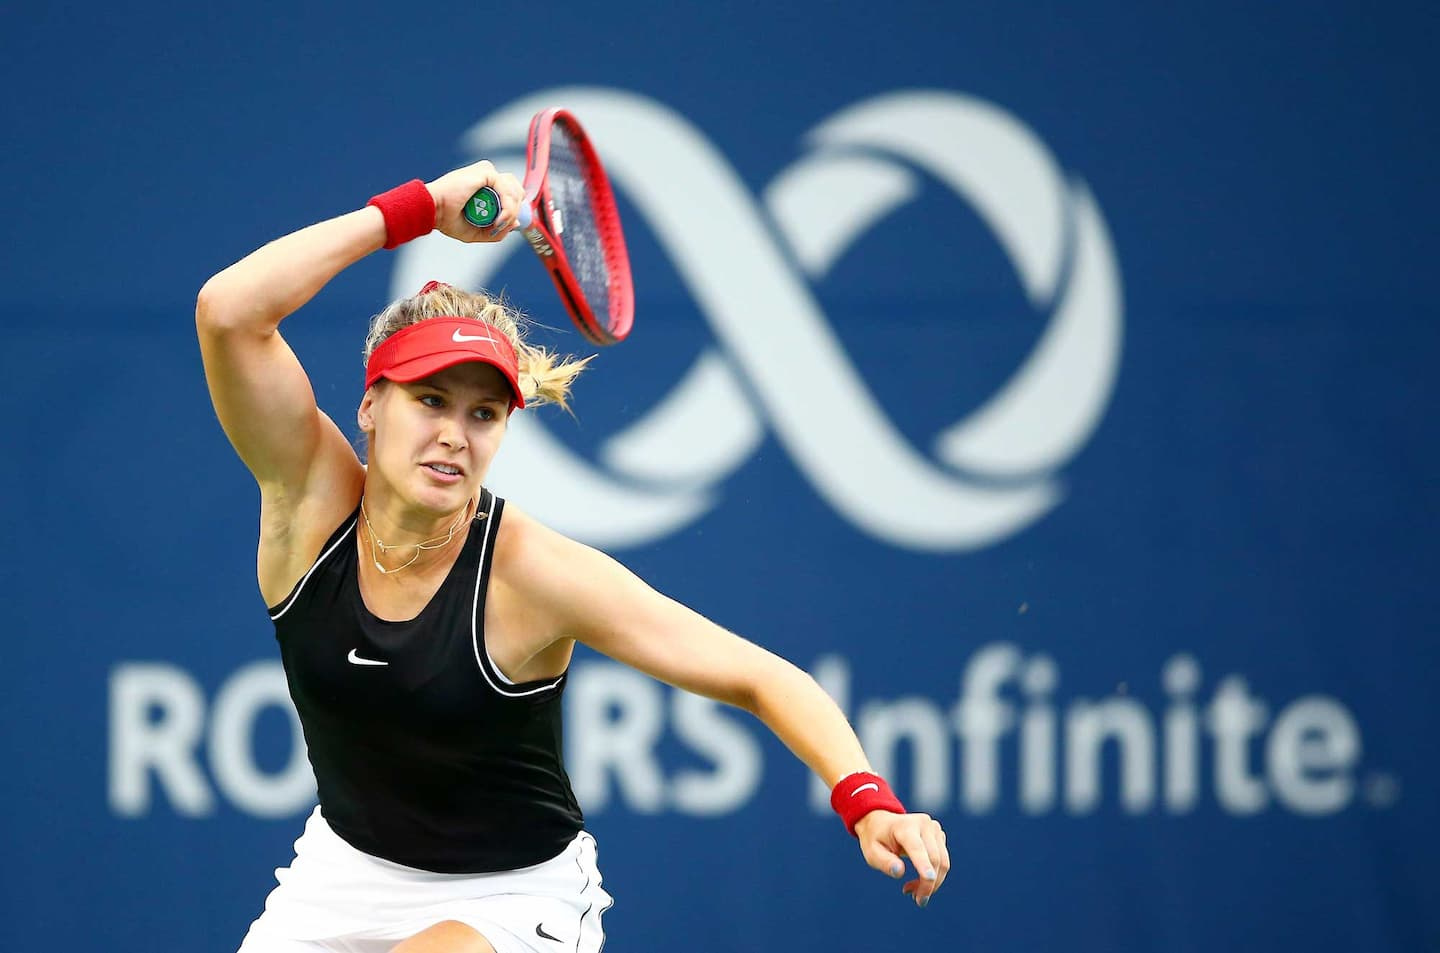 Eugenie Bouchard is not registered for the US Open